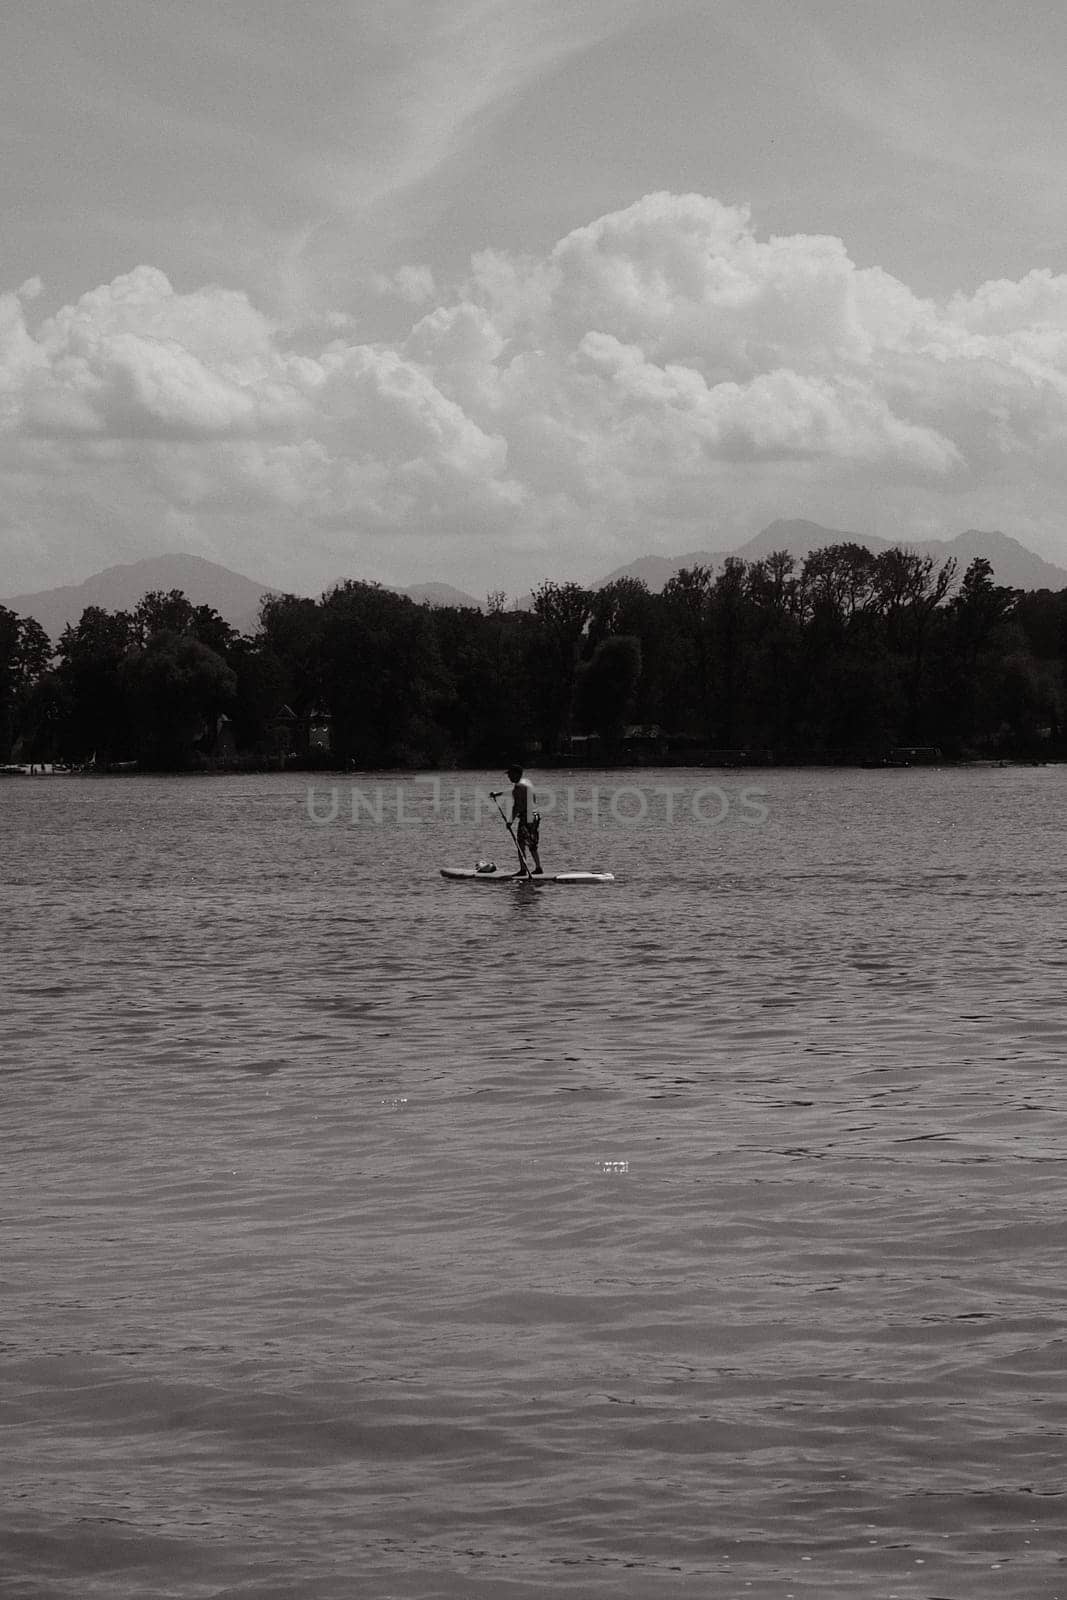 Grayscale shot of a man paddleboarding on Chiemsee lake in Bavaria, Germany on a sunny day